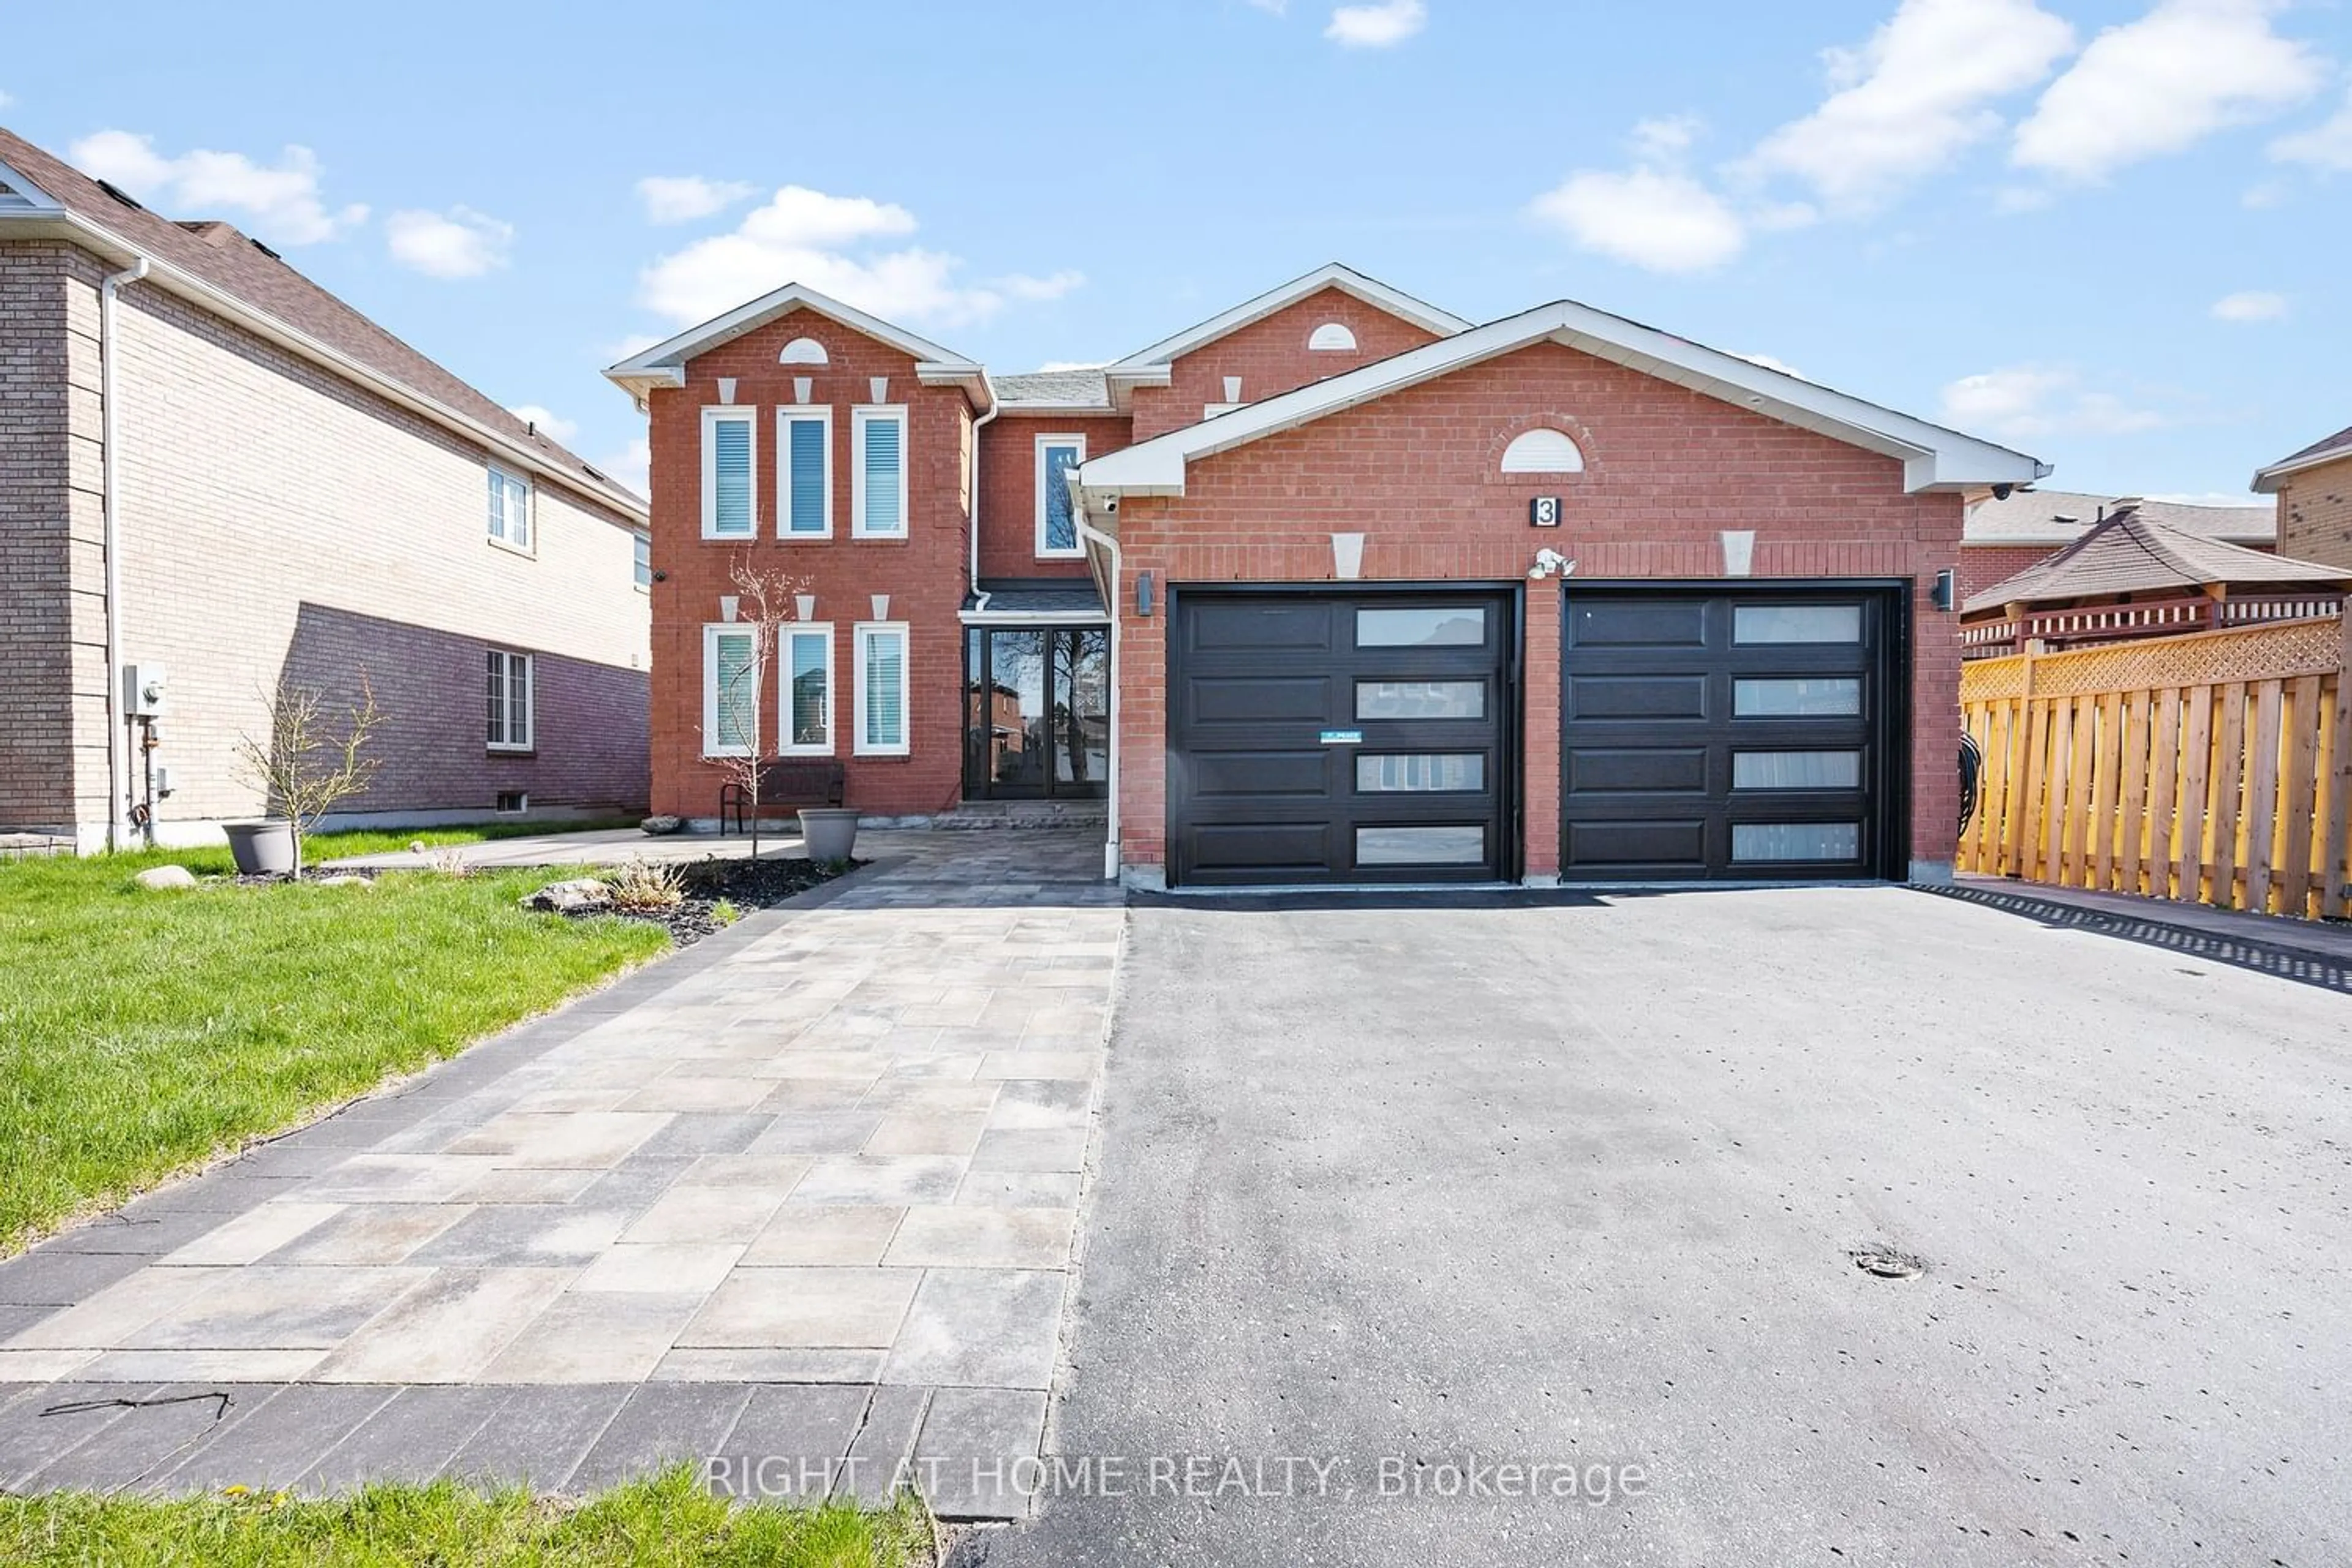 Home with brick exterior material for 3 Donald Wilson St, Whitby Ontario L1R 2H5